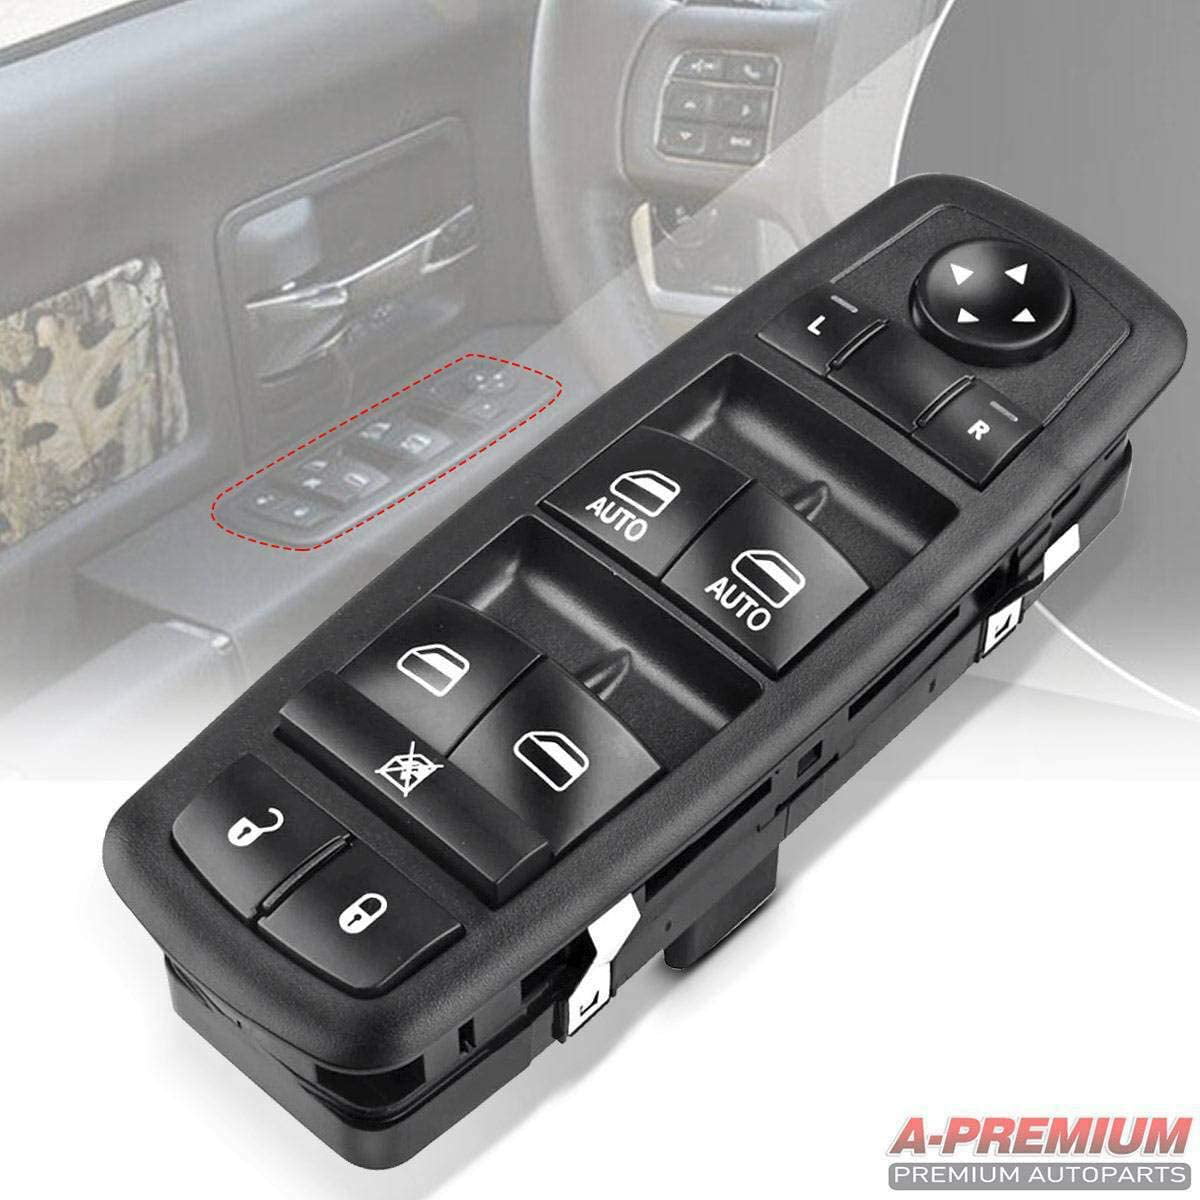 A-Premium Power Window Switch Master Compatible with Dodge Charger Journey Nitro 2008-2014 Chrysler 200 300 2011-2017 Ram 1500/2500/3500/4500/5500 2016 